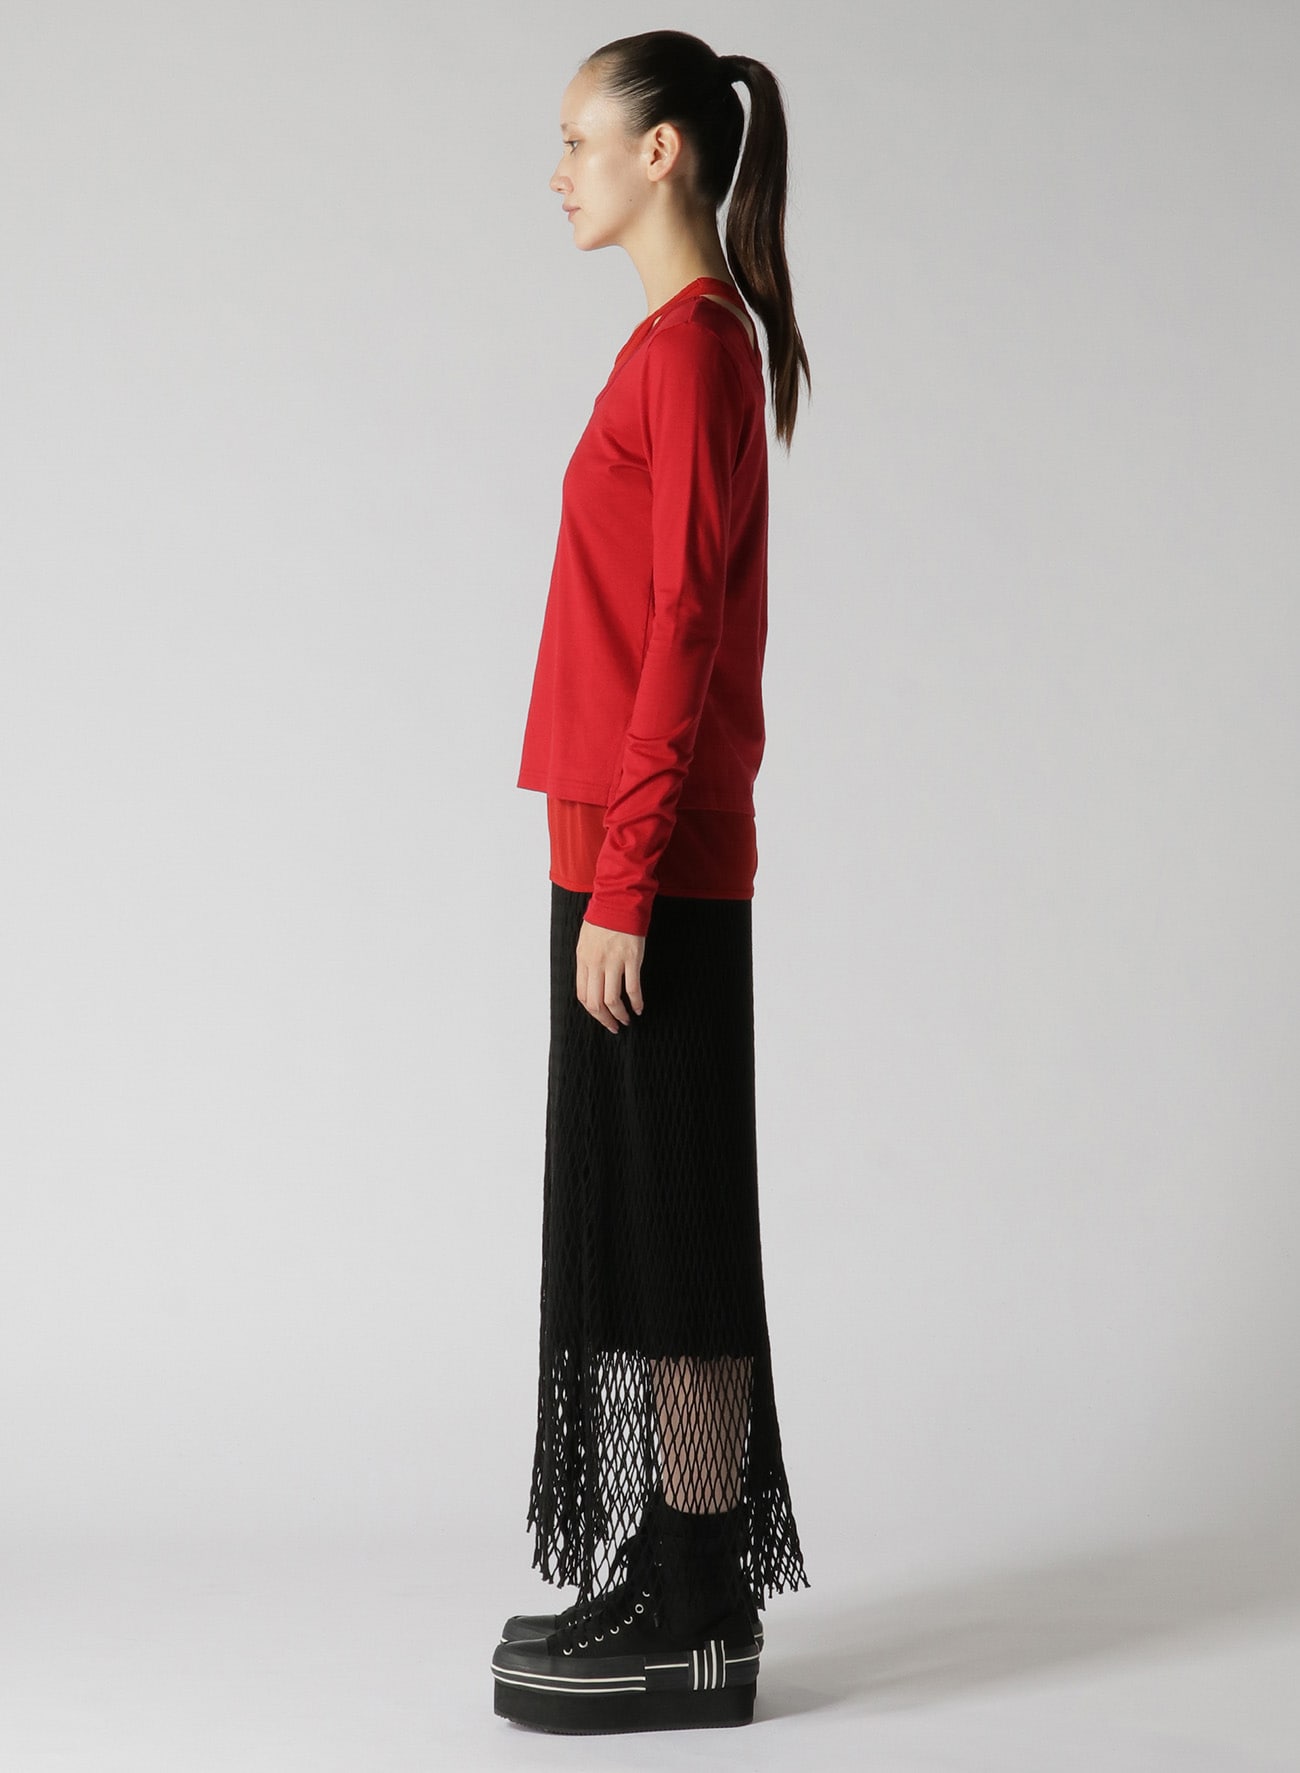 60/2 COTTON JERSEY LAYERED LONG T-SHIRT WITH TULLE